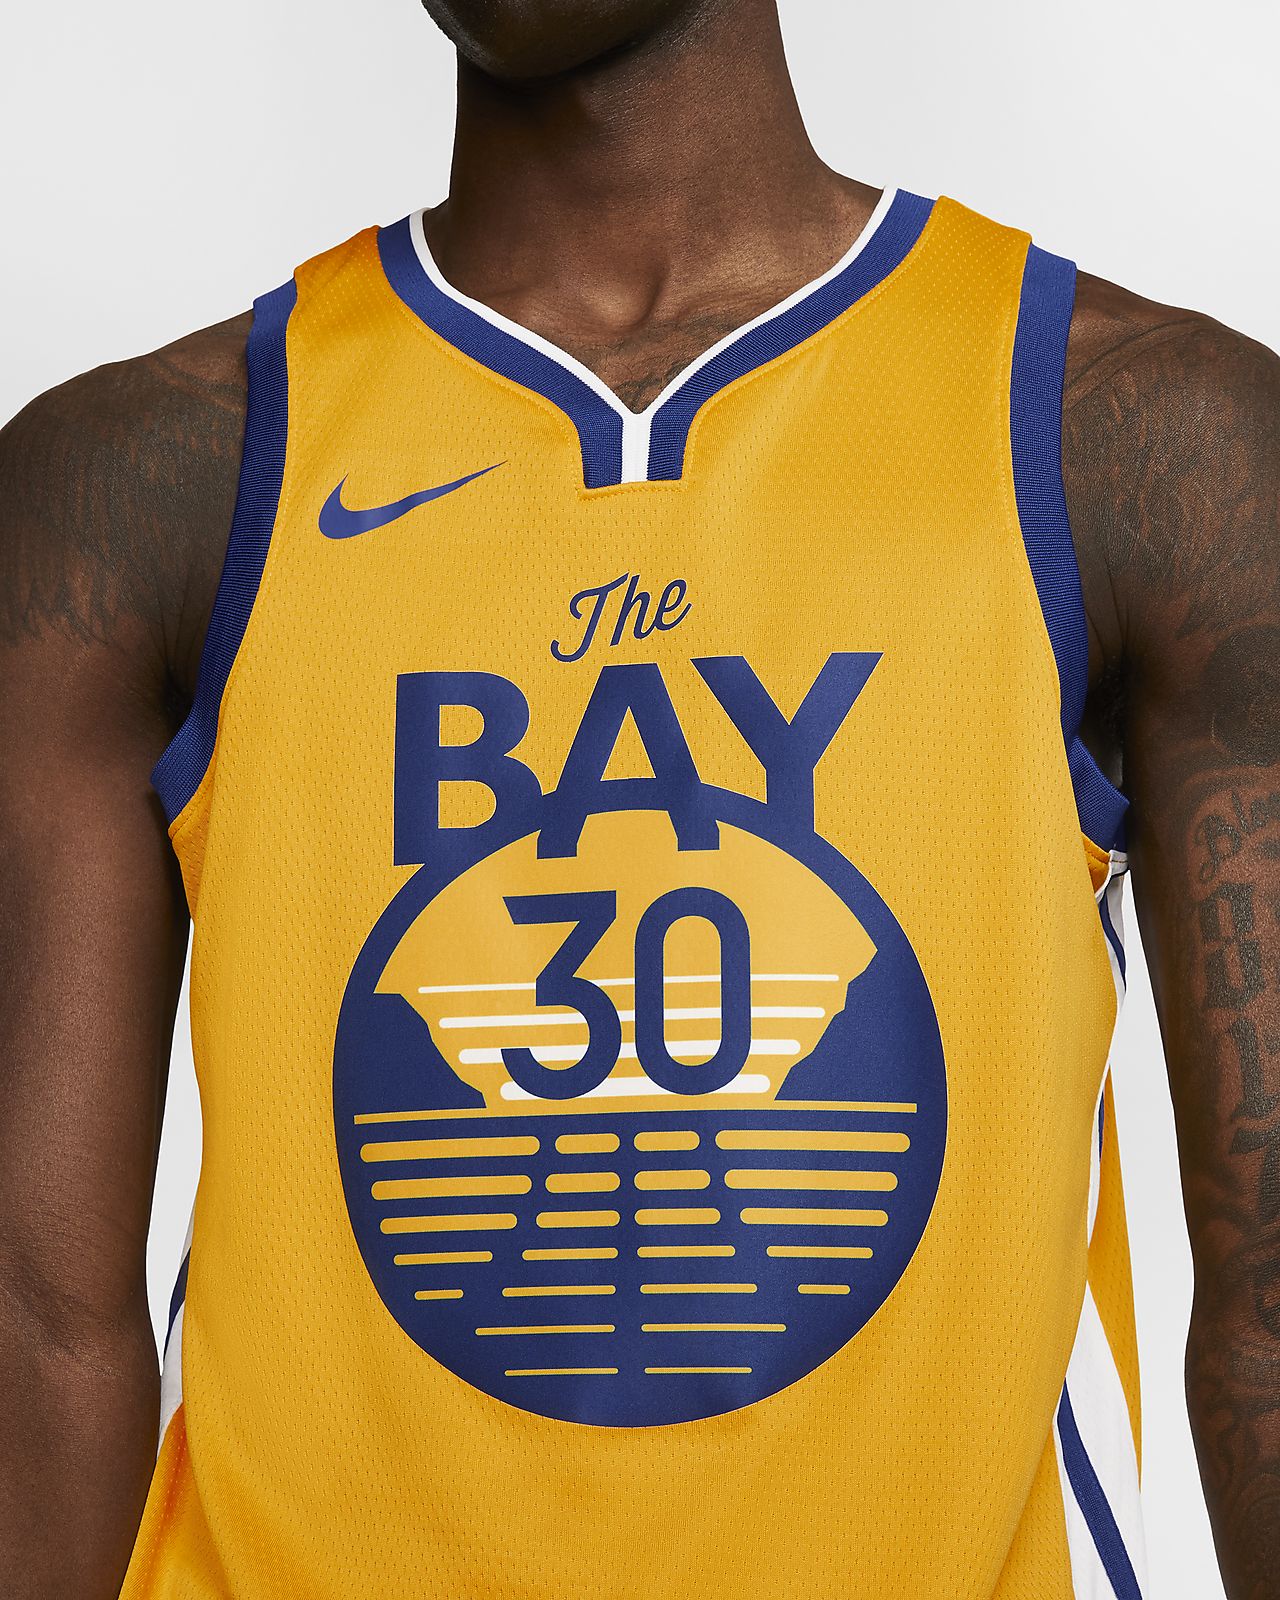 curry bay jersey